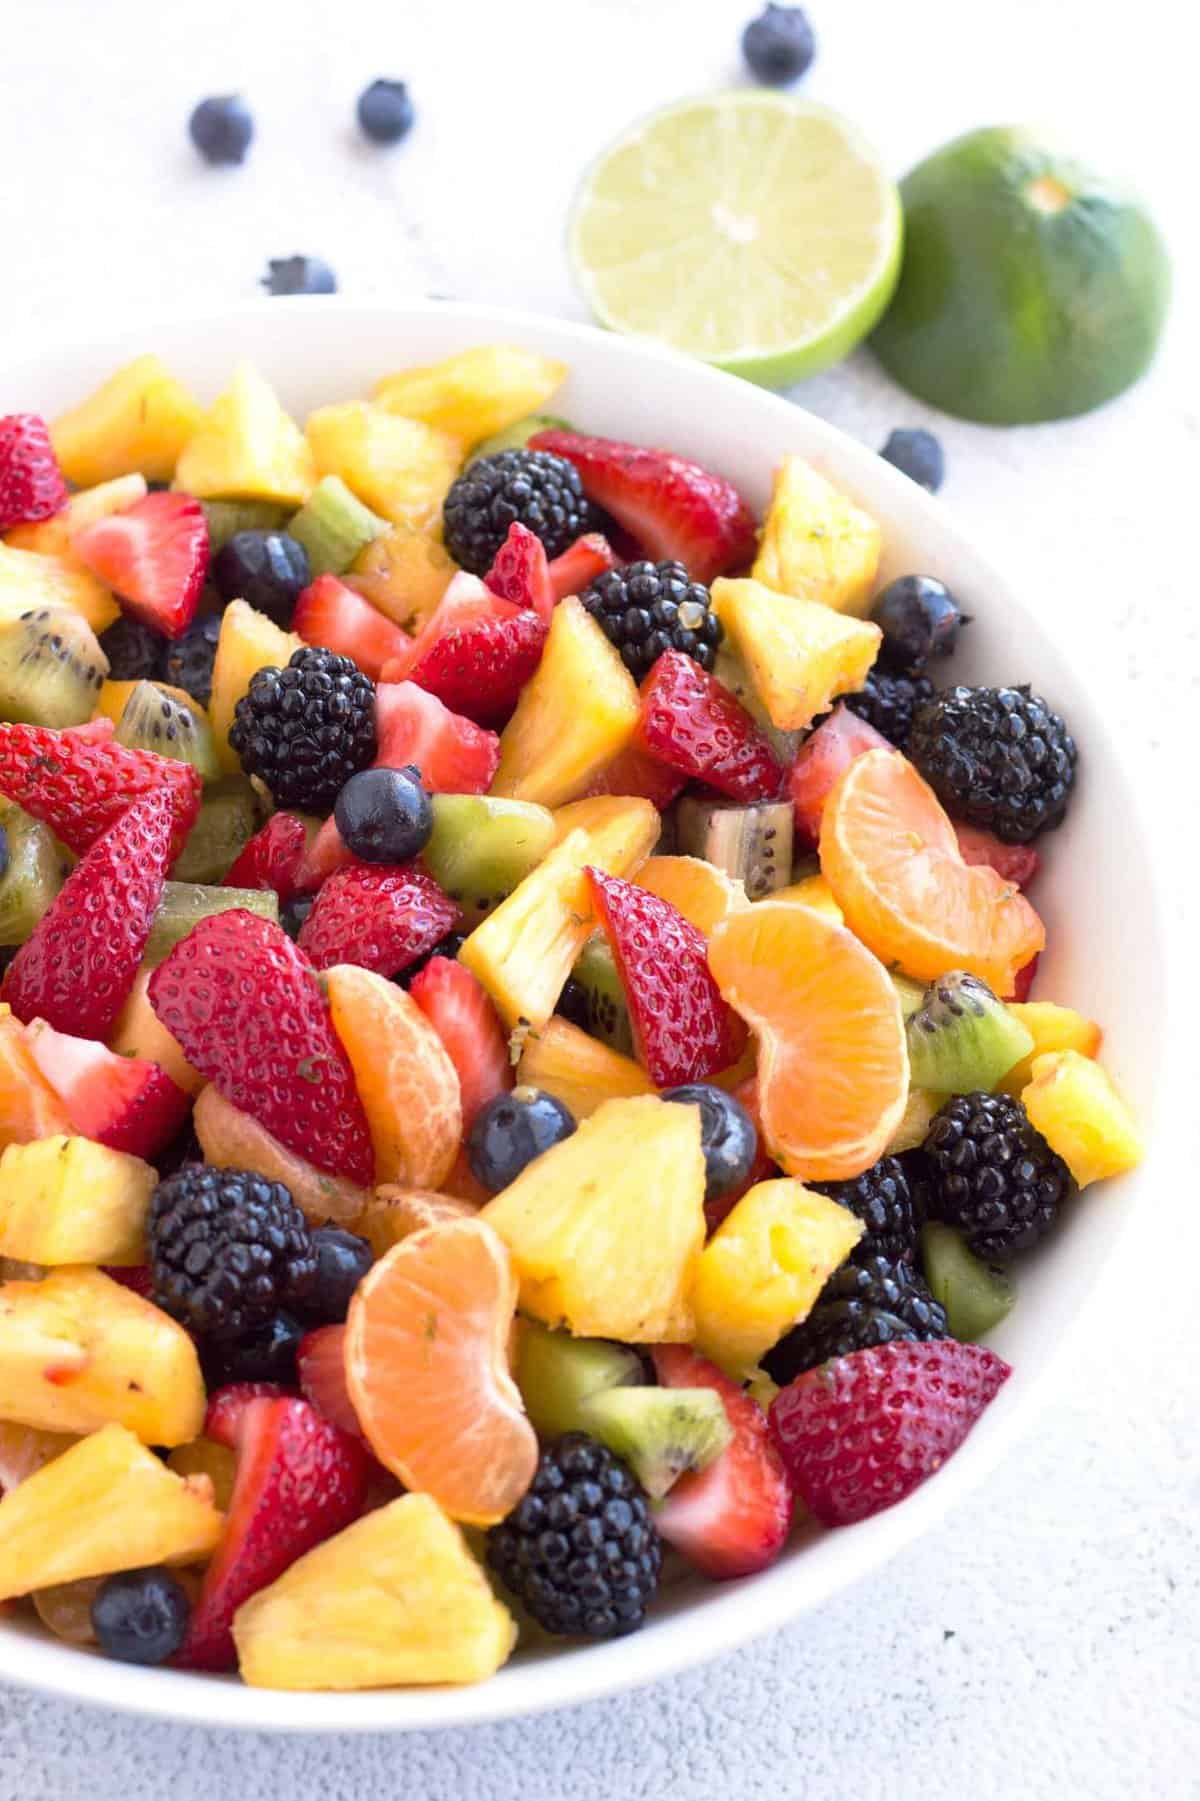  Healthy and delicious, this fruit salad is a must-try!